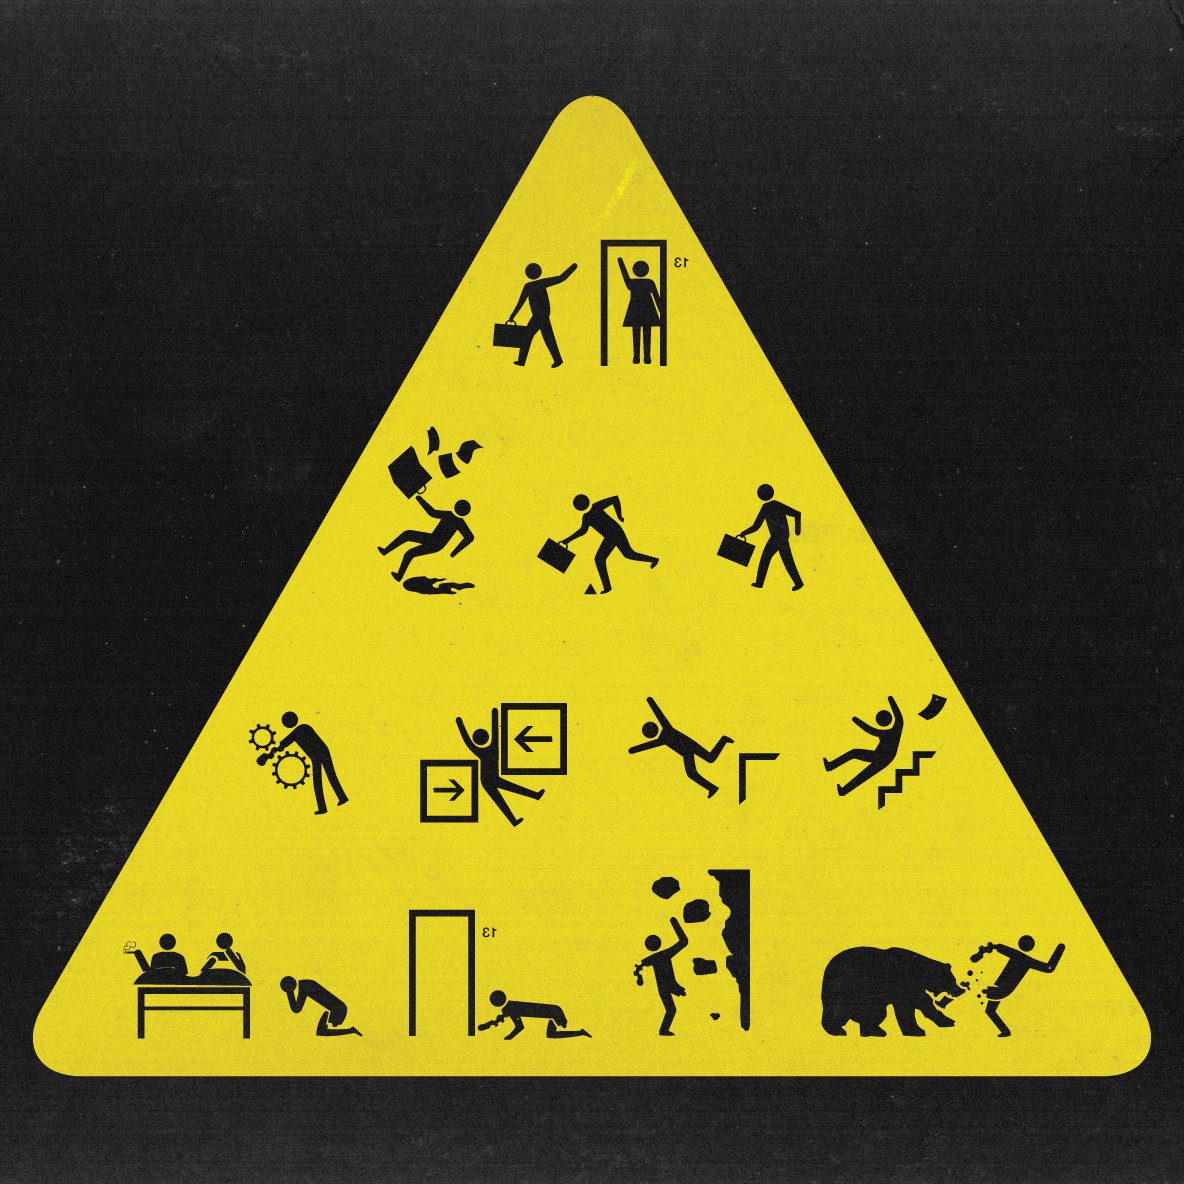 humor, Signs, Black Background, Yellow, Men, Women, Accidents, Warning Signs Wallpaper